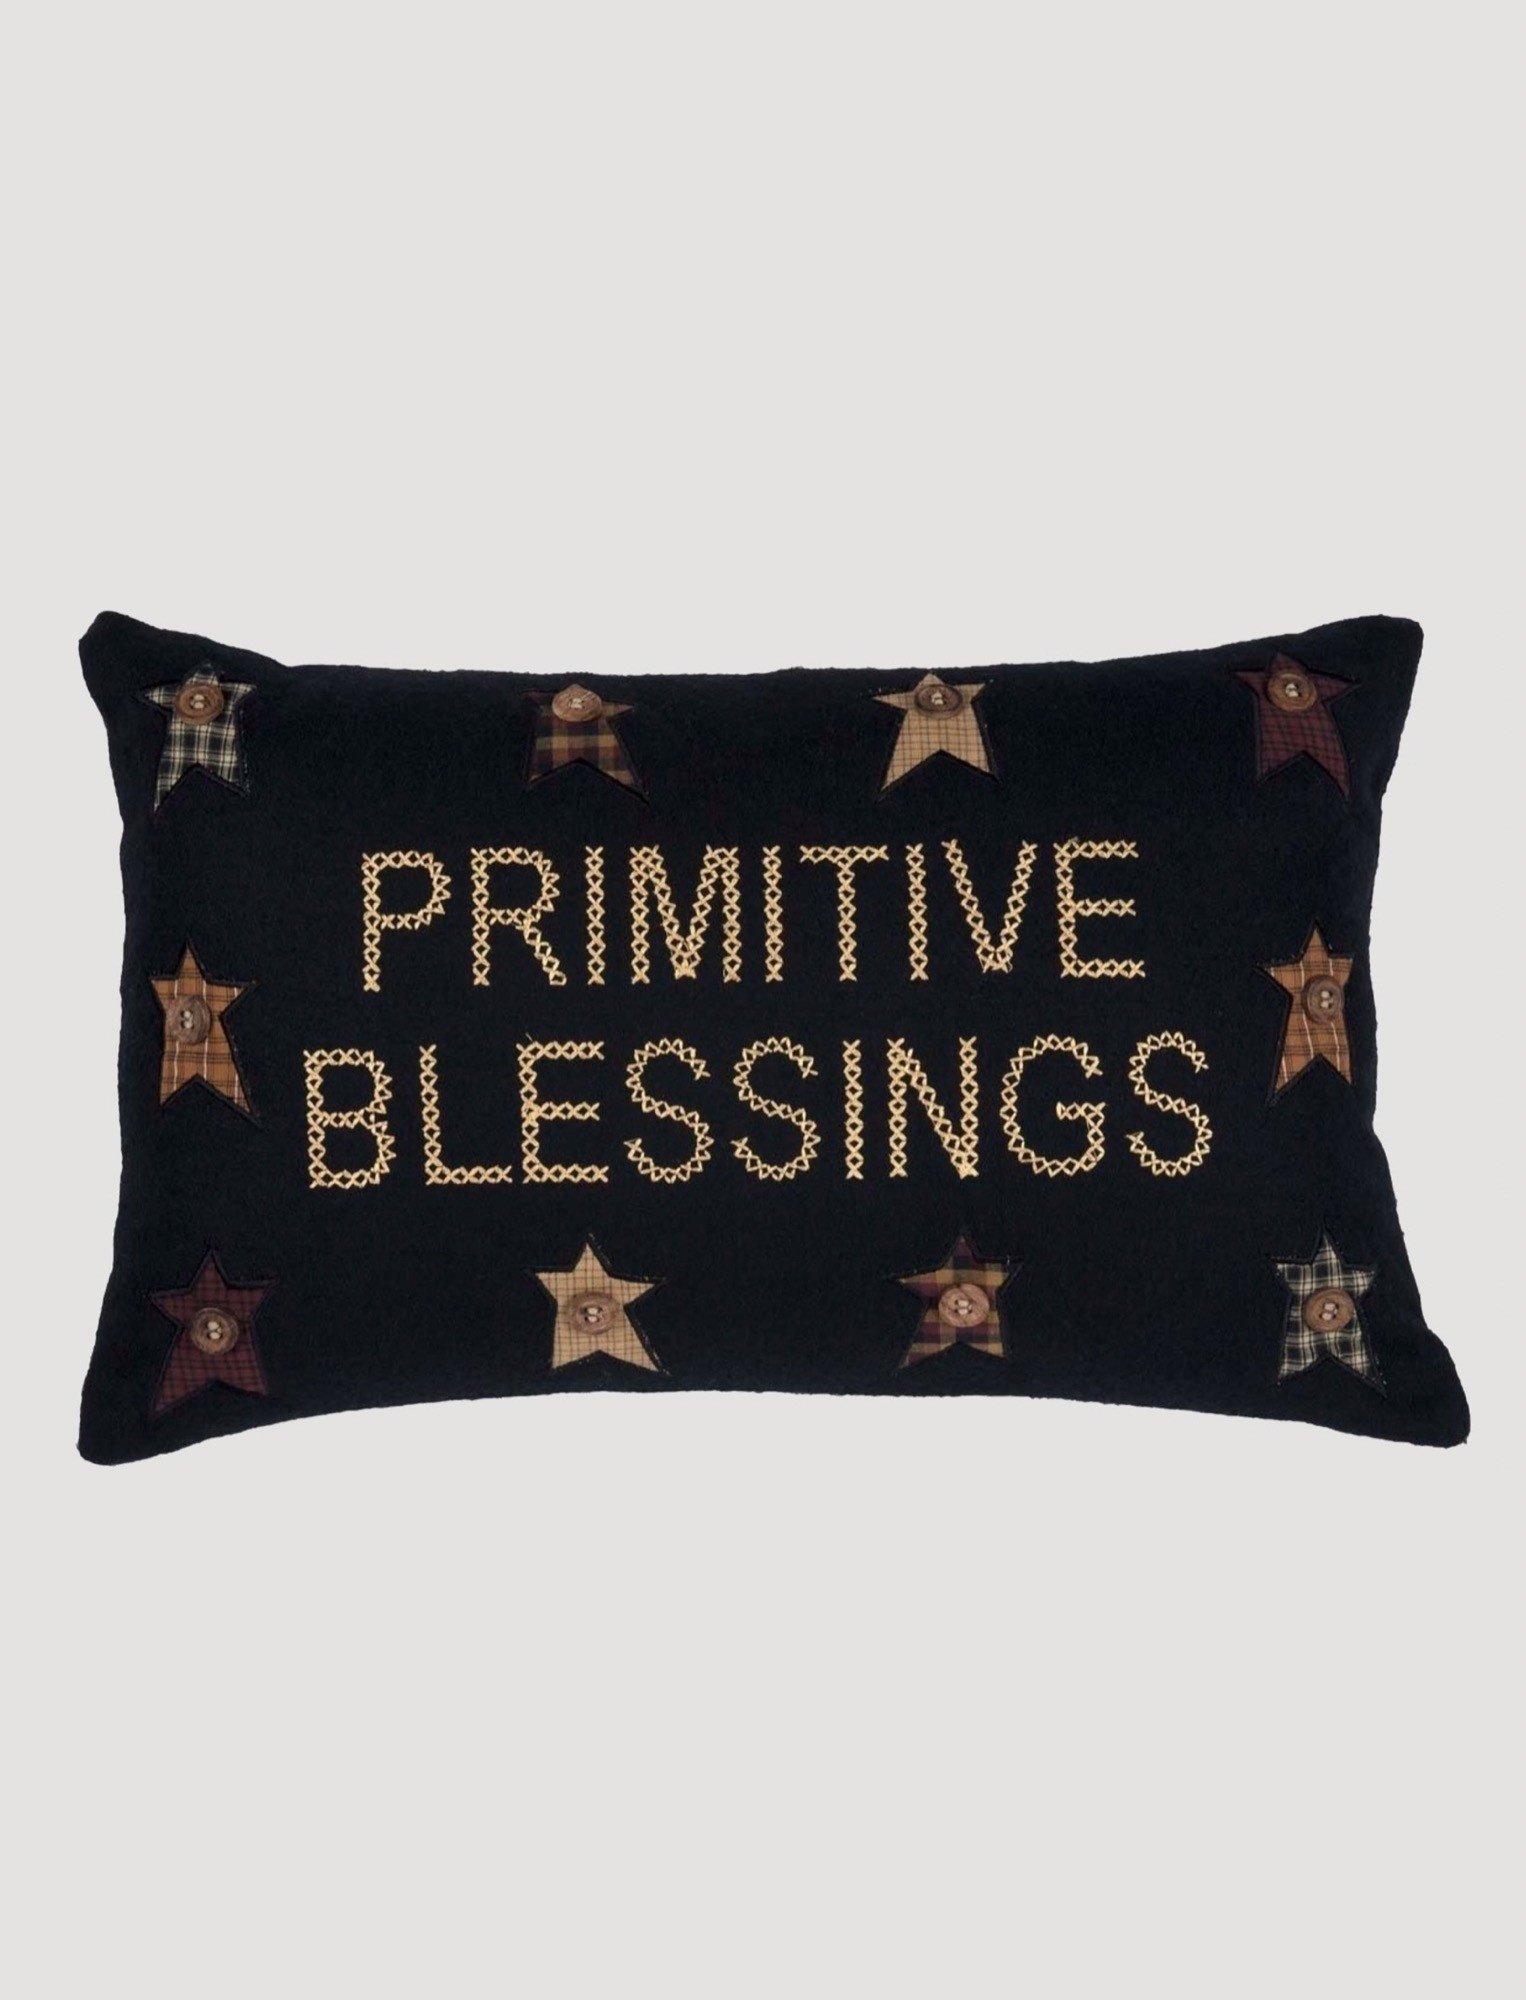 VHC Brands Heritage Farms Primitive Blessings Pillow 14" x 22" Brand: VHC Brands